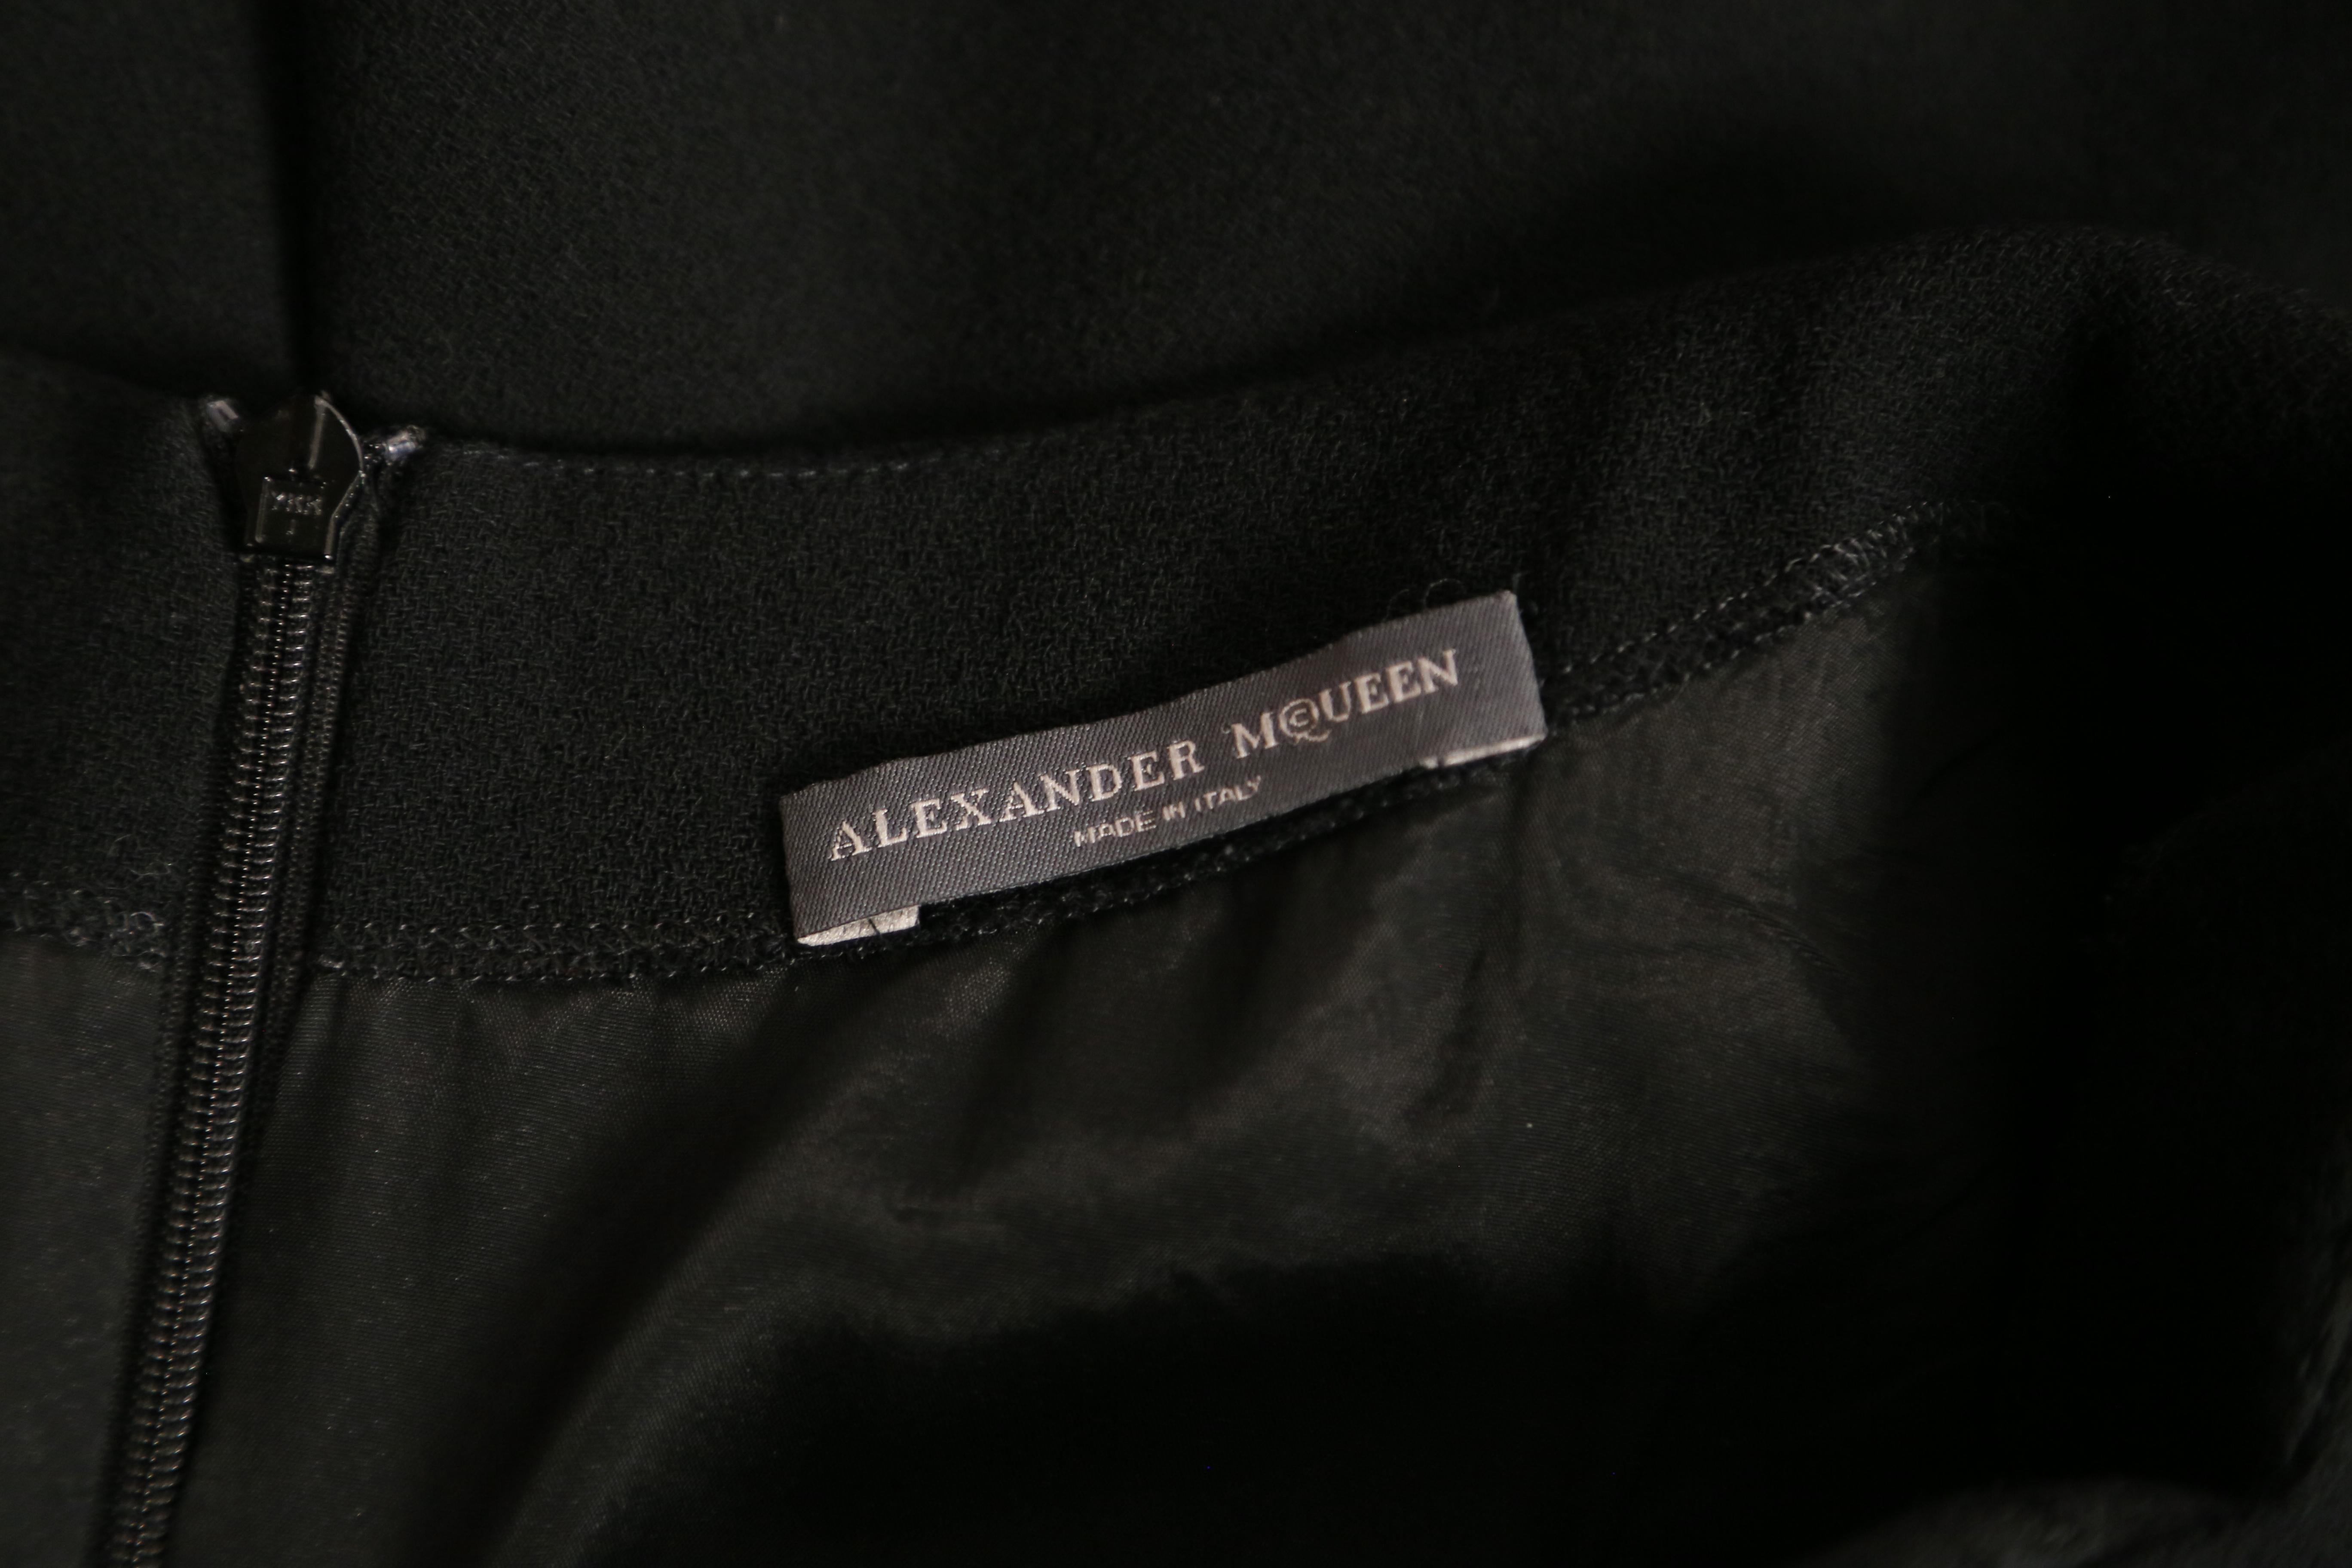 2004 ALEXANDER MCQUEEN black wool dress with white stitching  For Sale 3